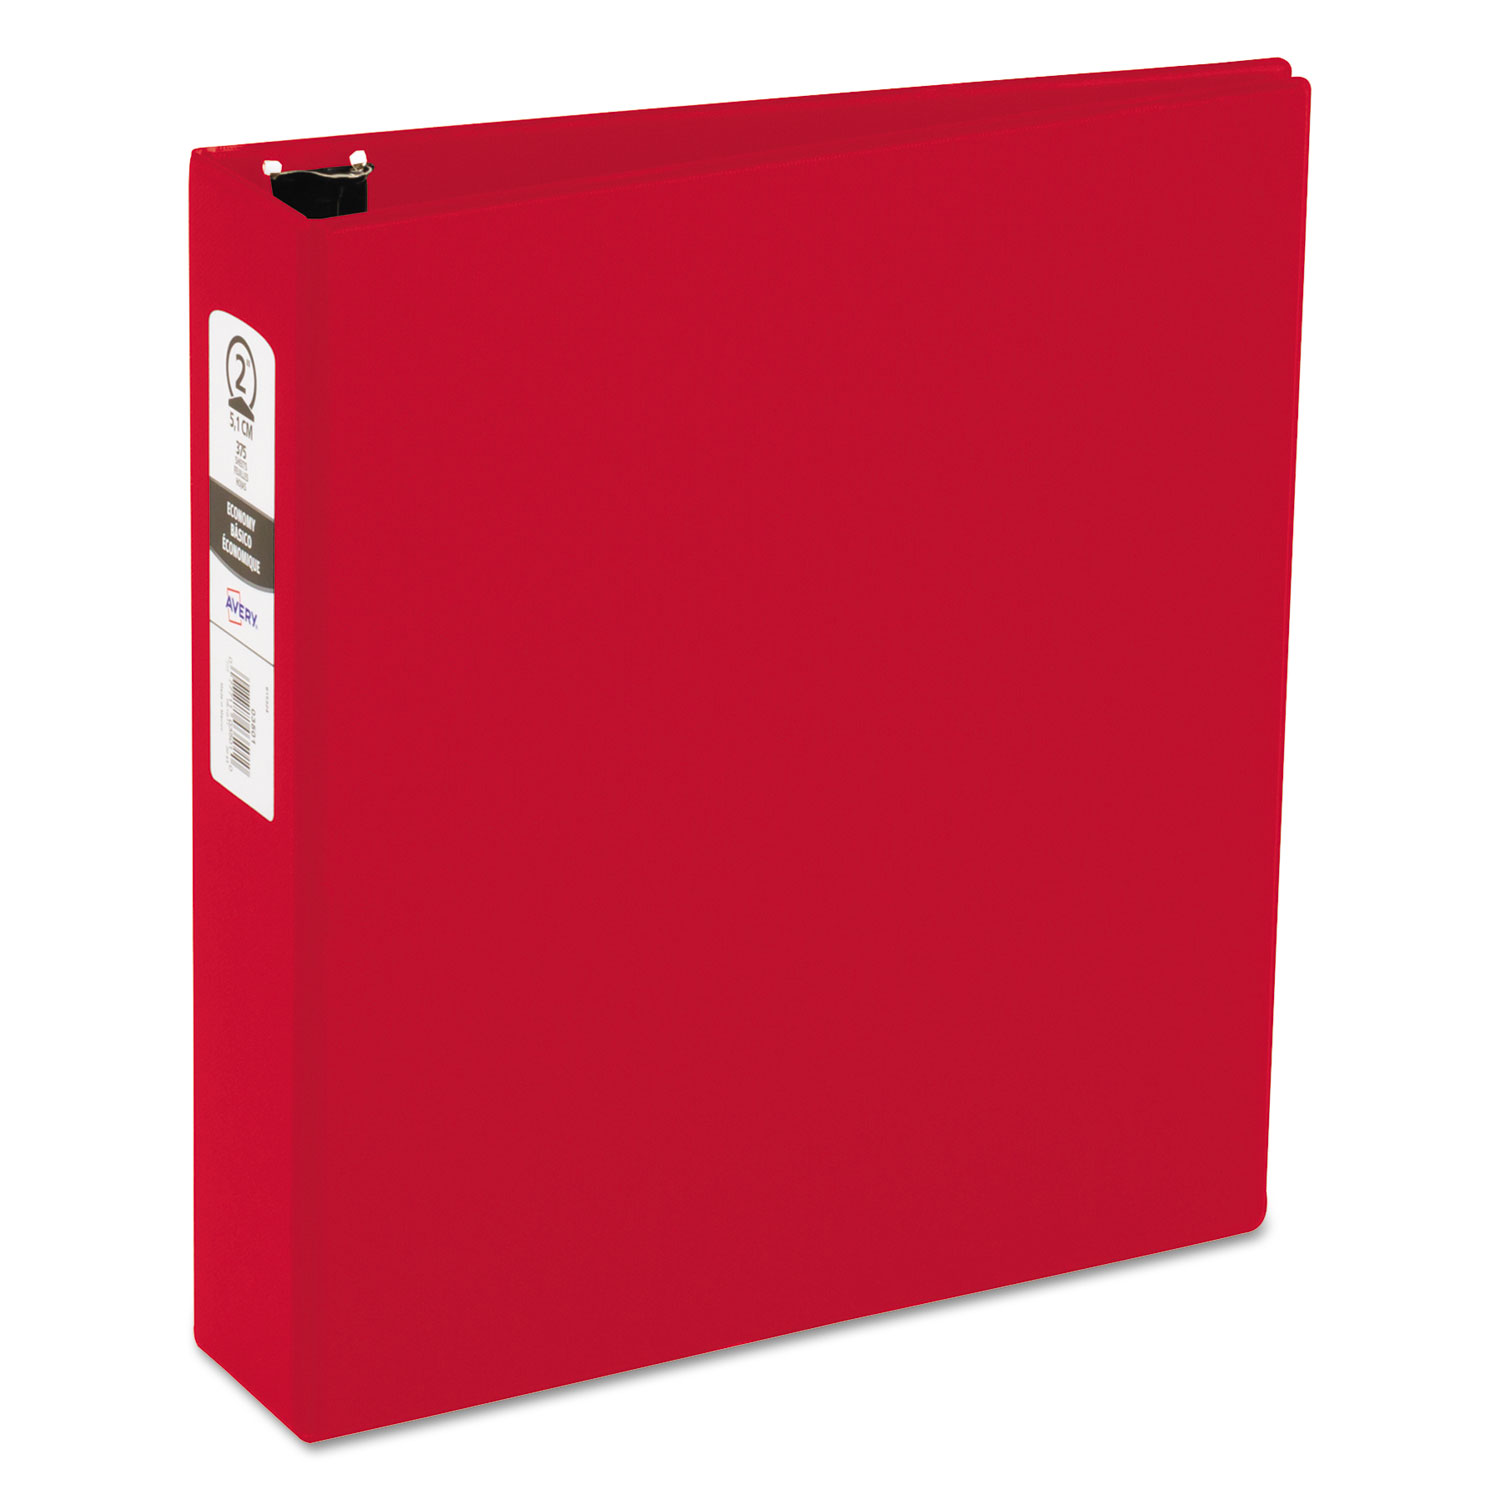  Avery 03510 Economy Non-View Binder with Round Rings, 3 Rings, 2 Capacity, 11 x 8.5, Red (AVE03510) 